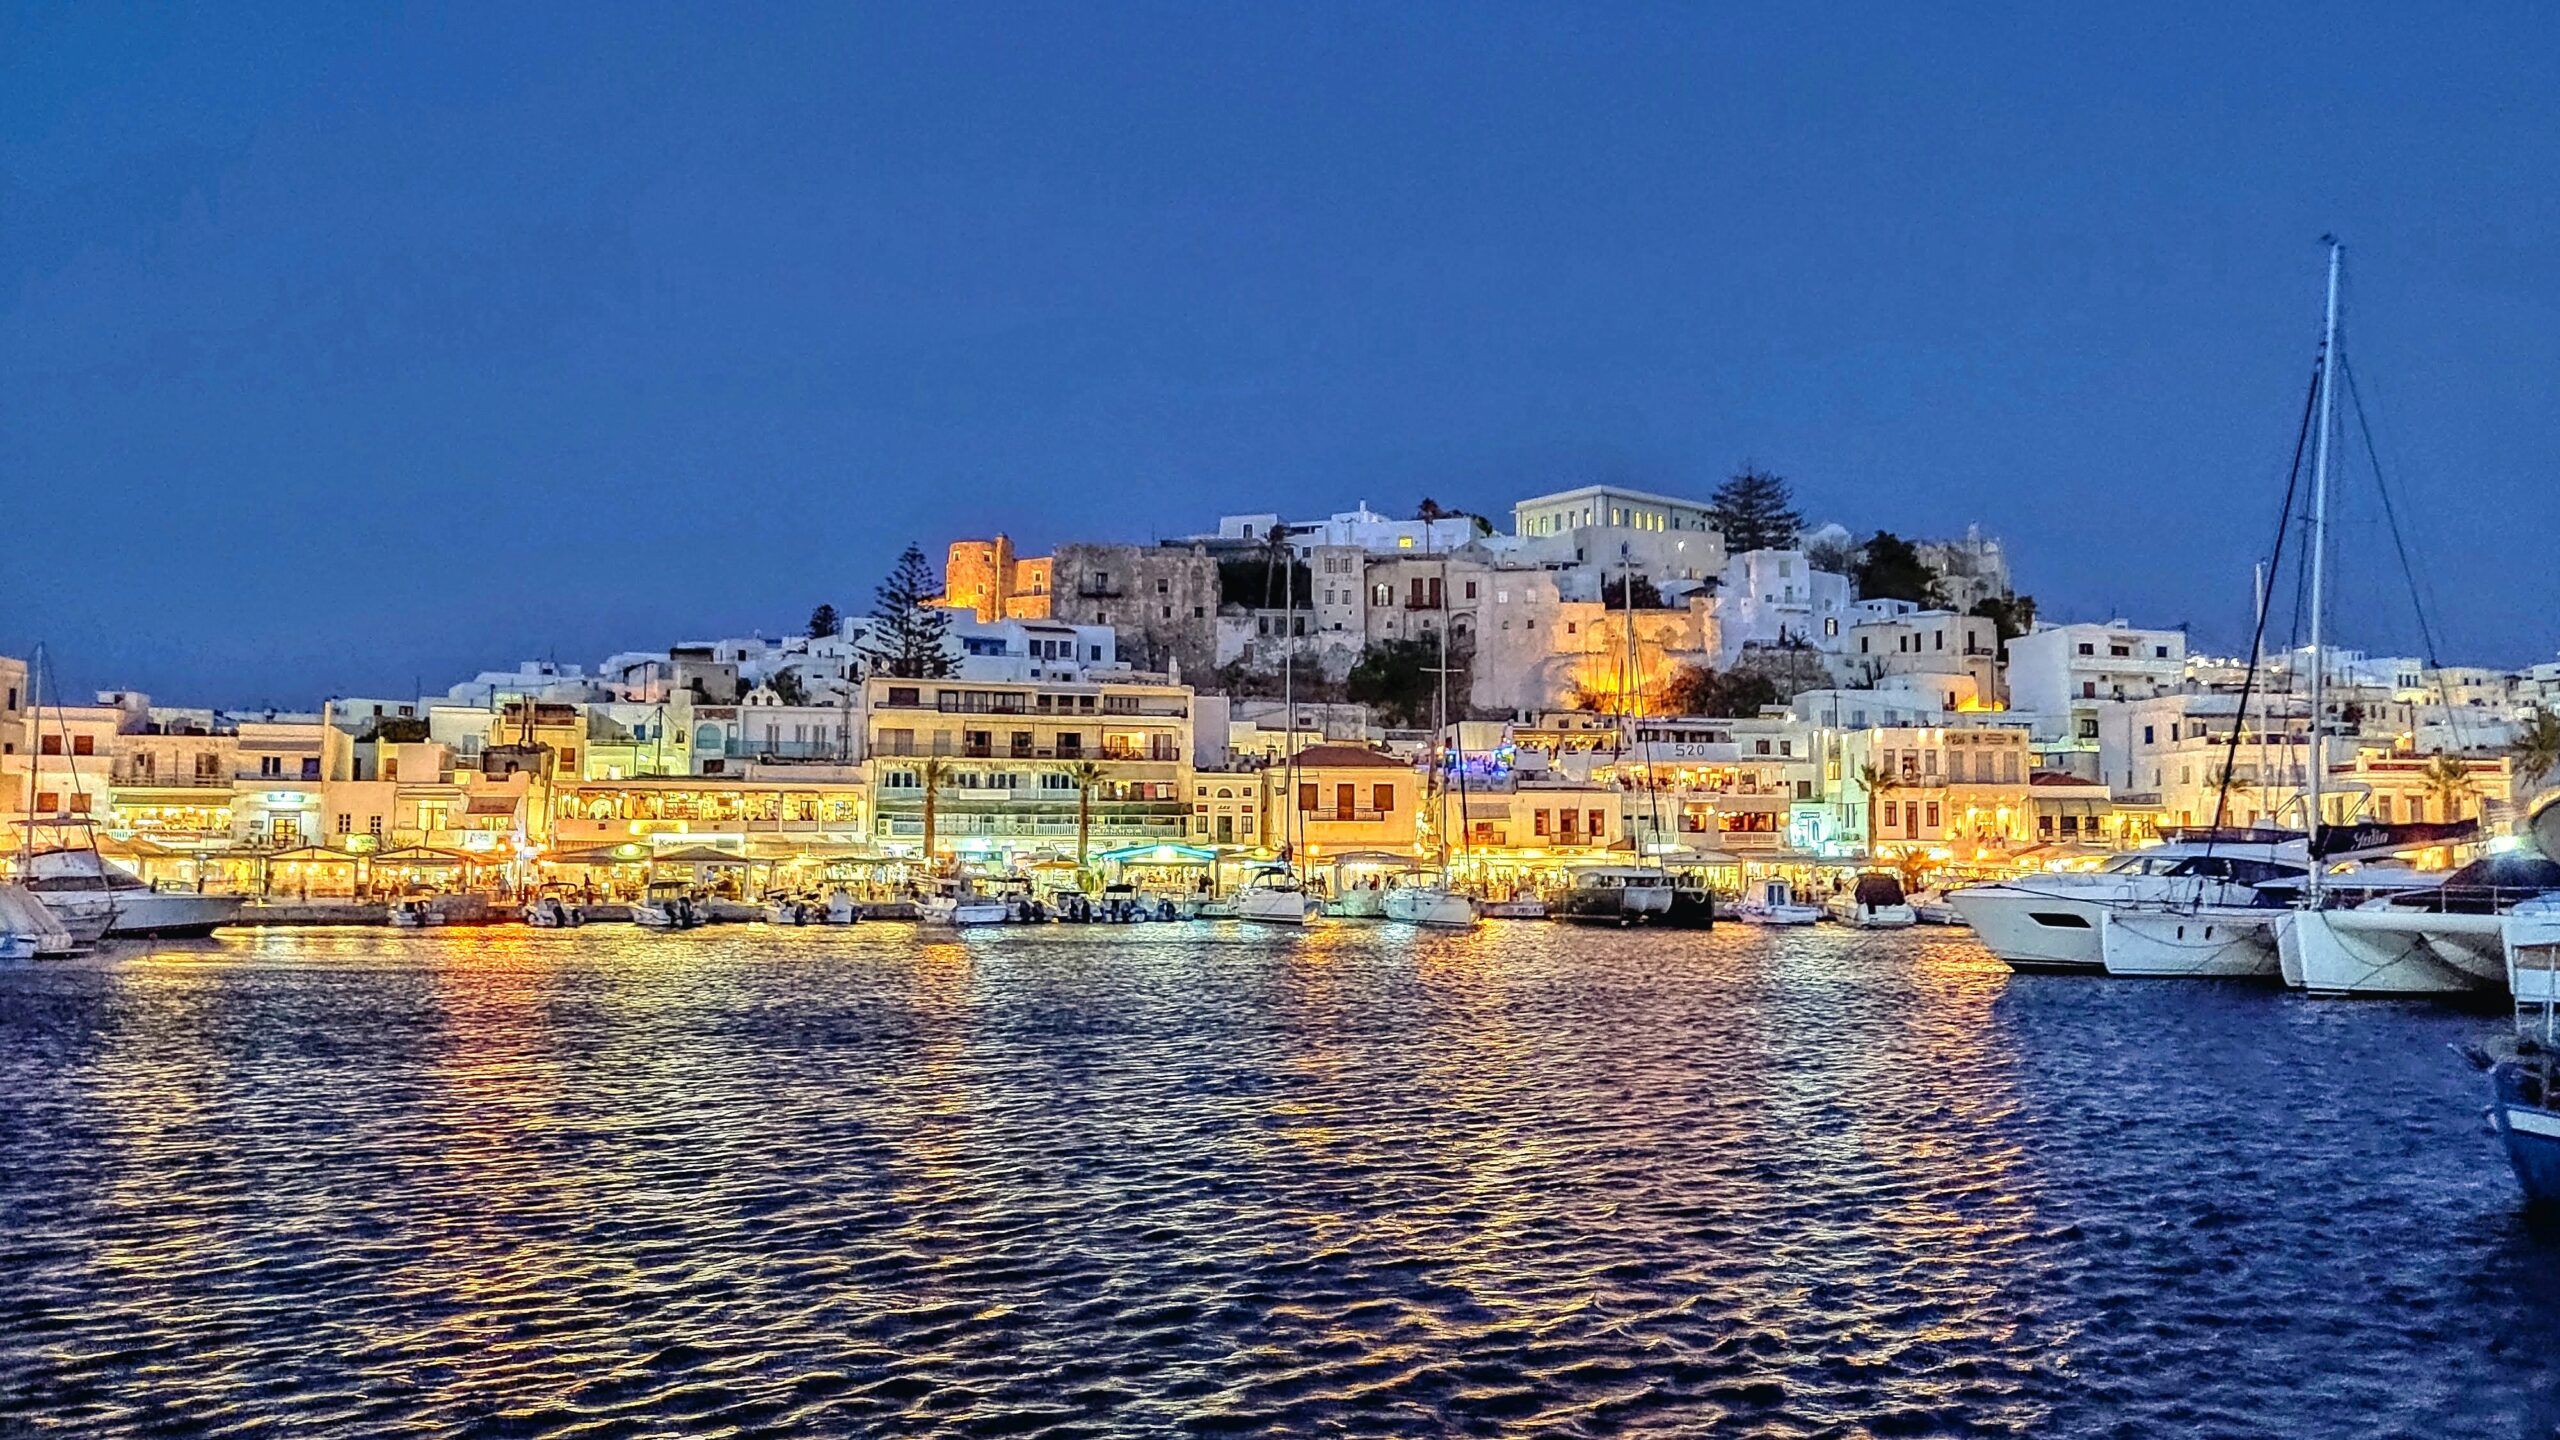 night view of the town of Naxos fro Port